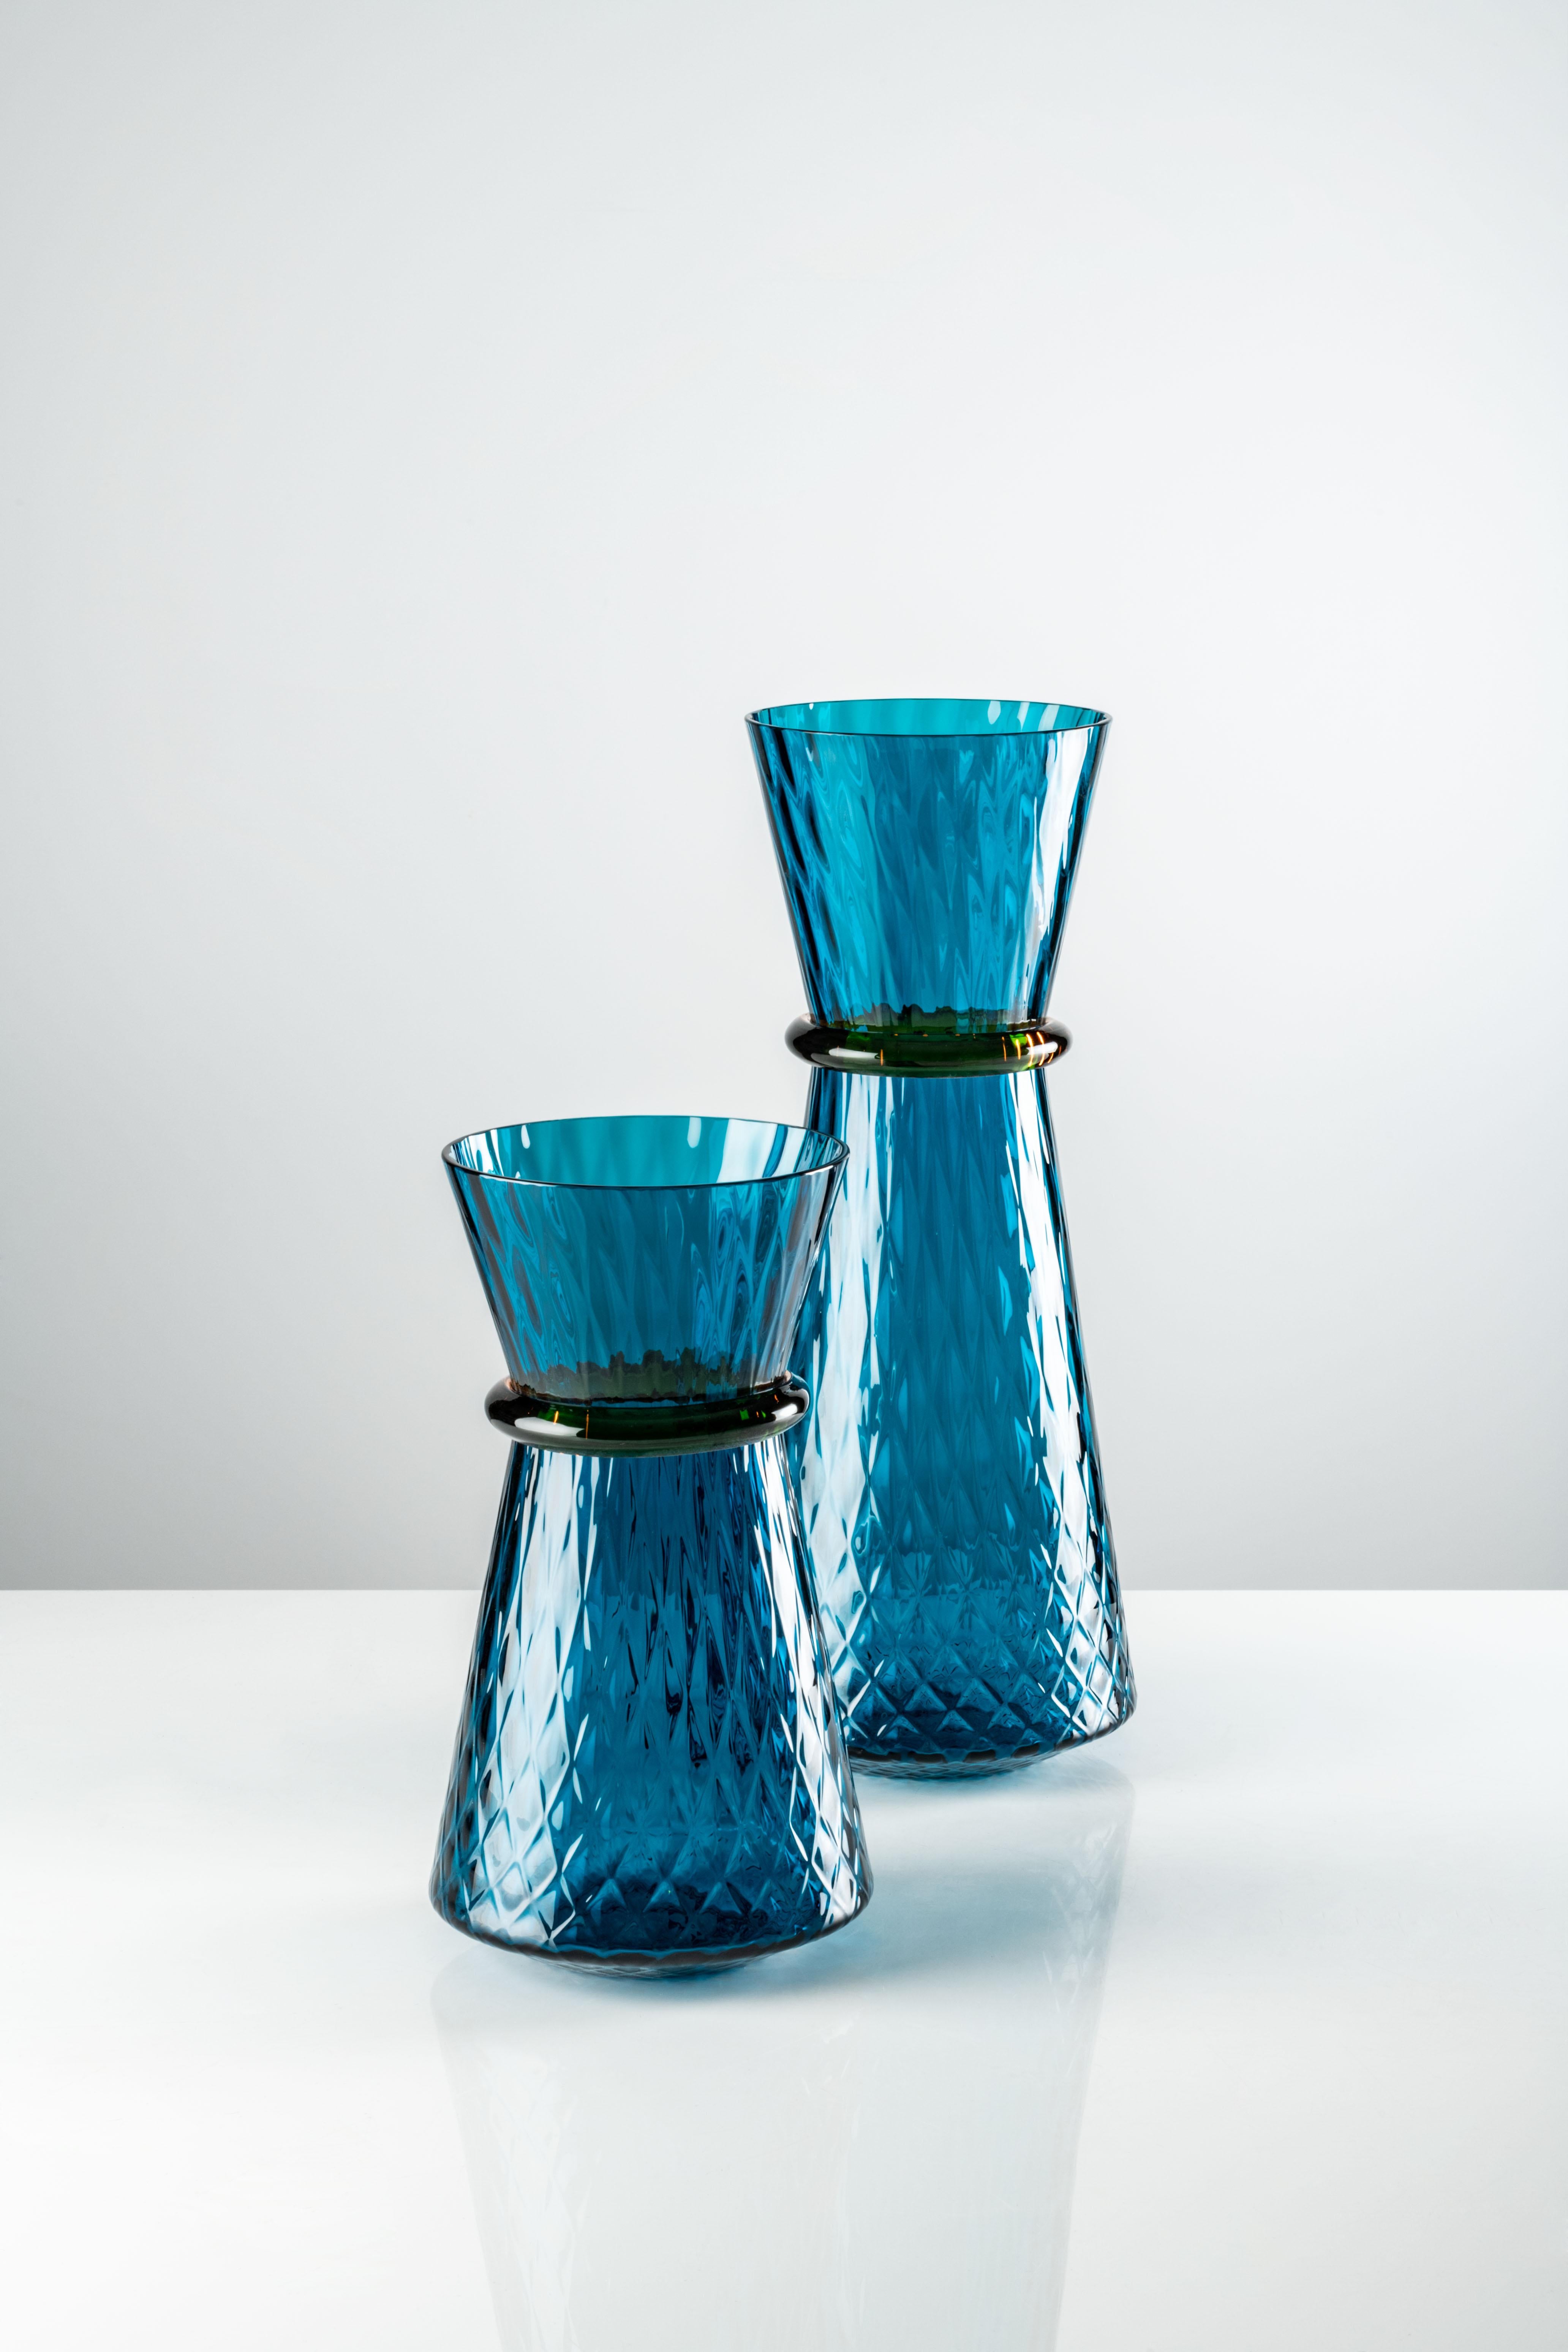 Tiara small vase in horizon and amber Murano glass by Francesco Lucchese for Venini. The art of glassmaking meets the endless potential of light. A jewel-like creation that carries an infinite sparkle, precious like gemstones. Francesco Lucchese